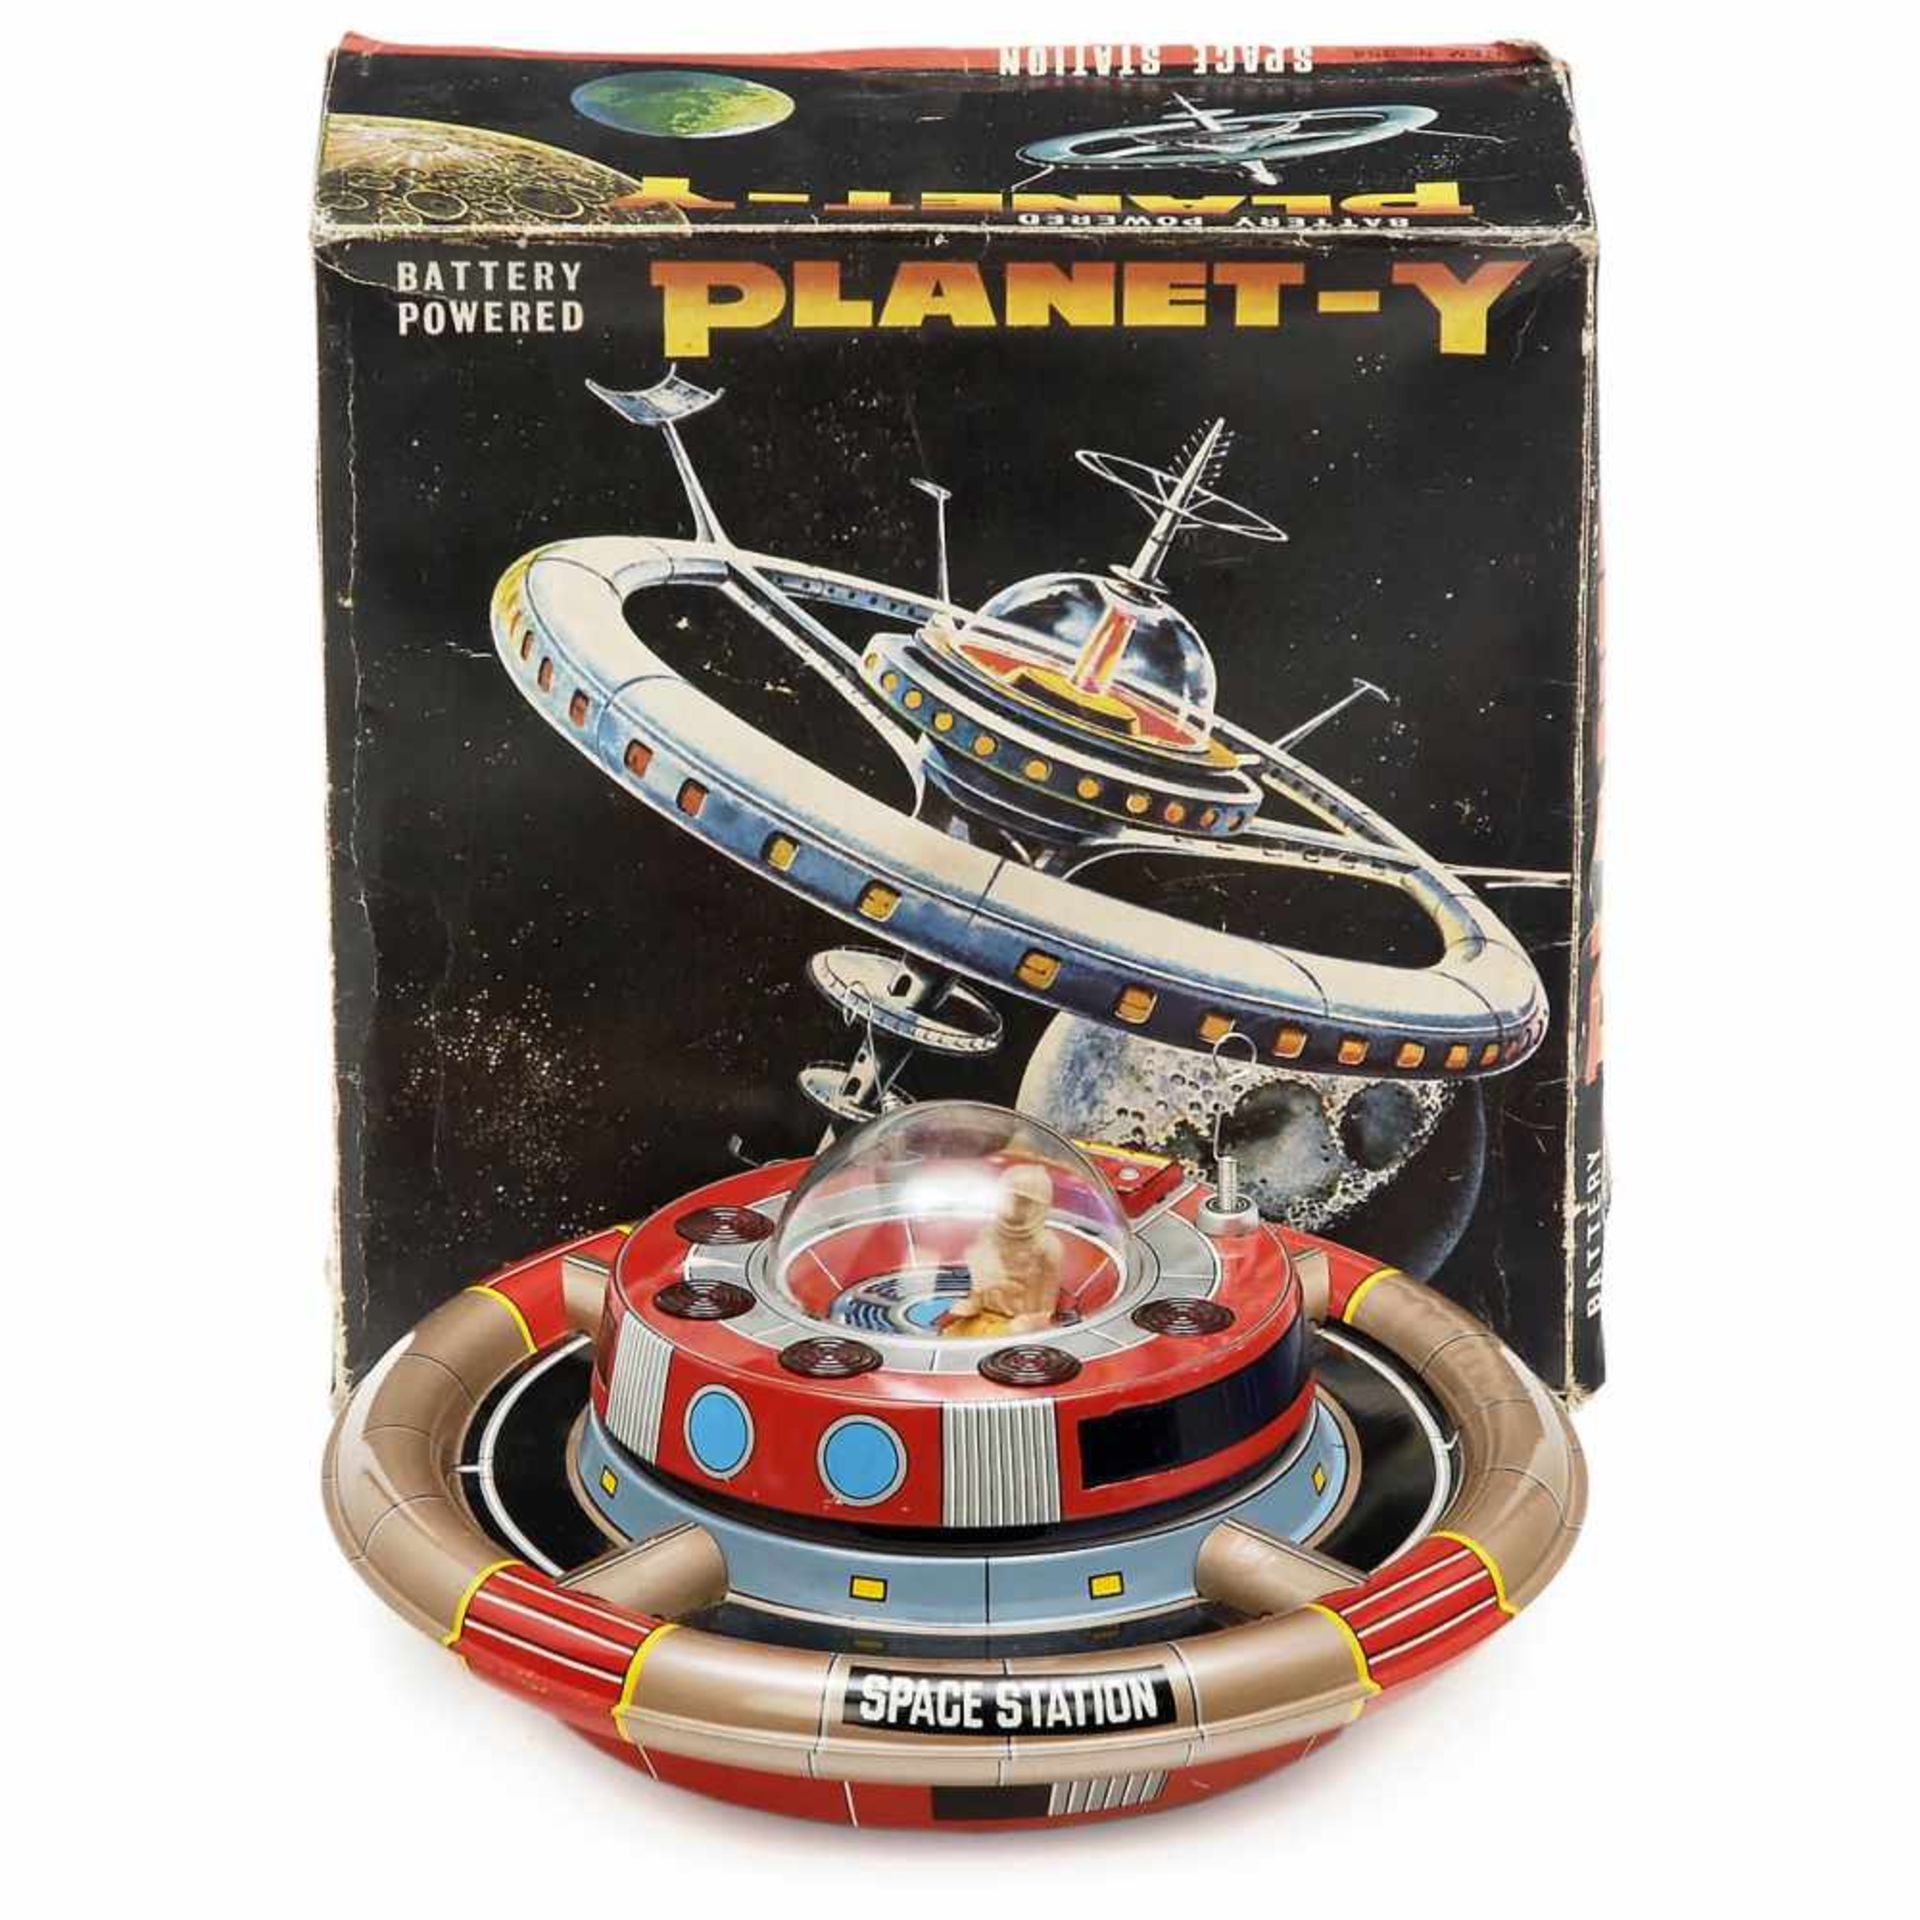 Planet-Y Space Station, c. 1968Made by Nomura, Japan. Lithographed tinplate flying saucer, battery-